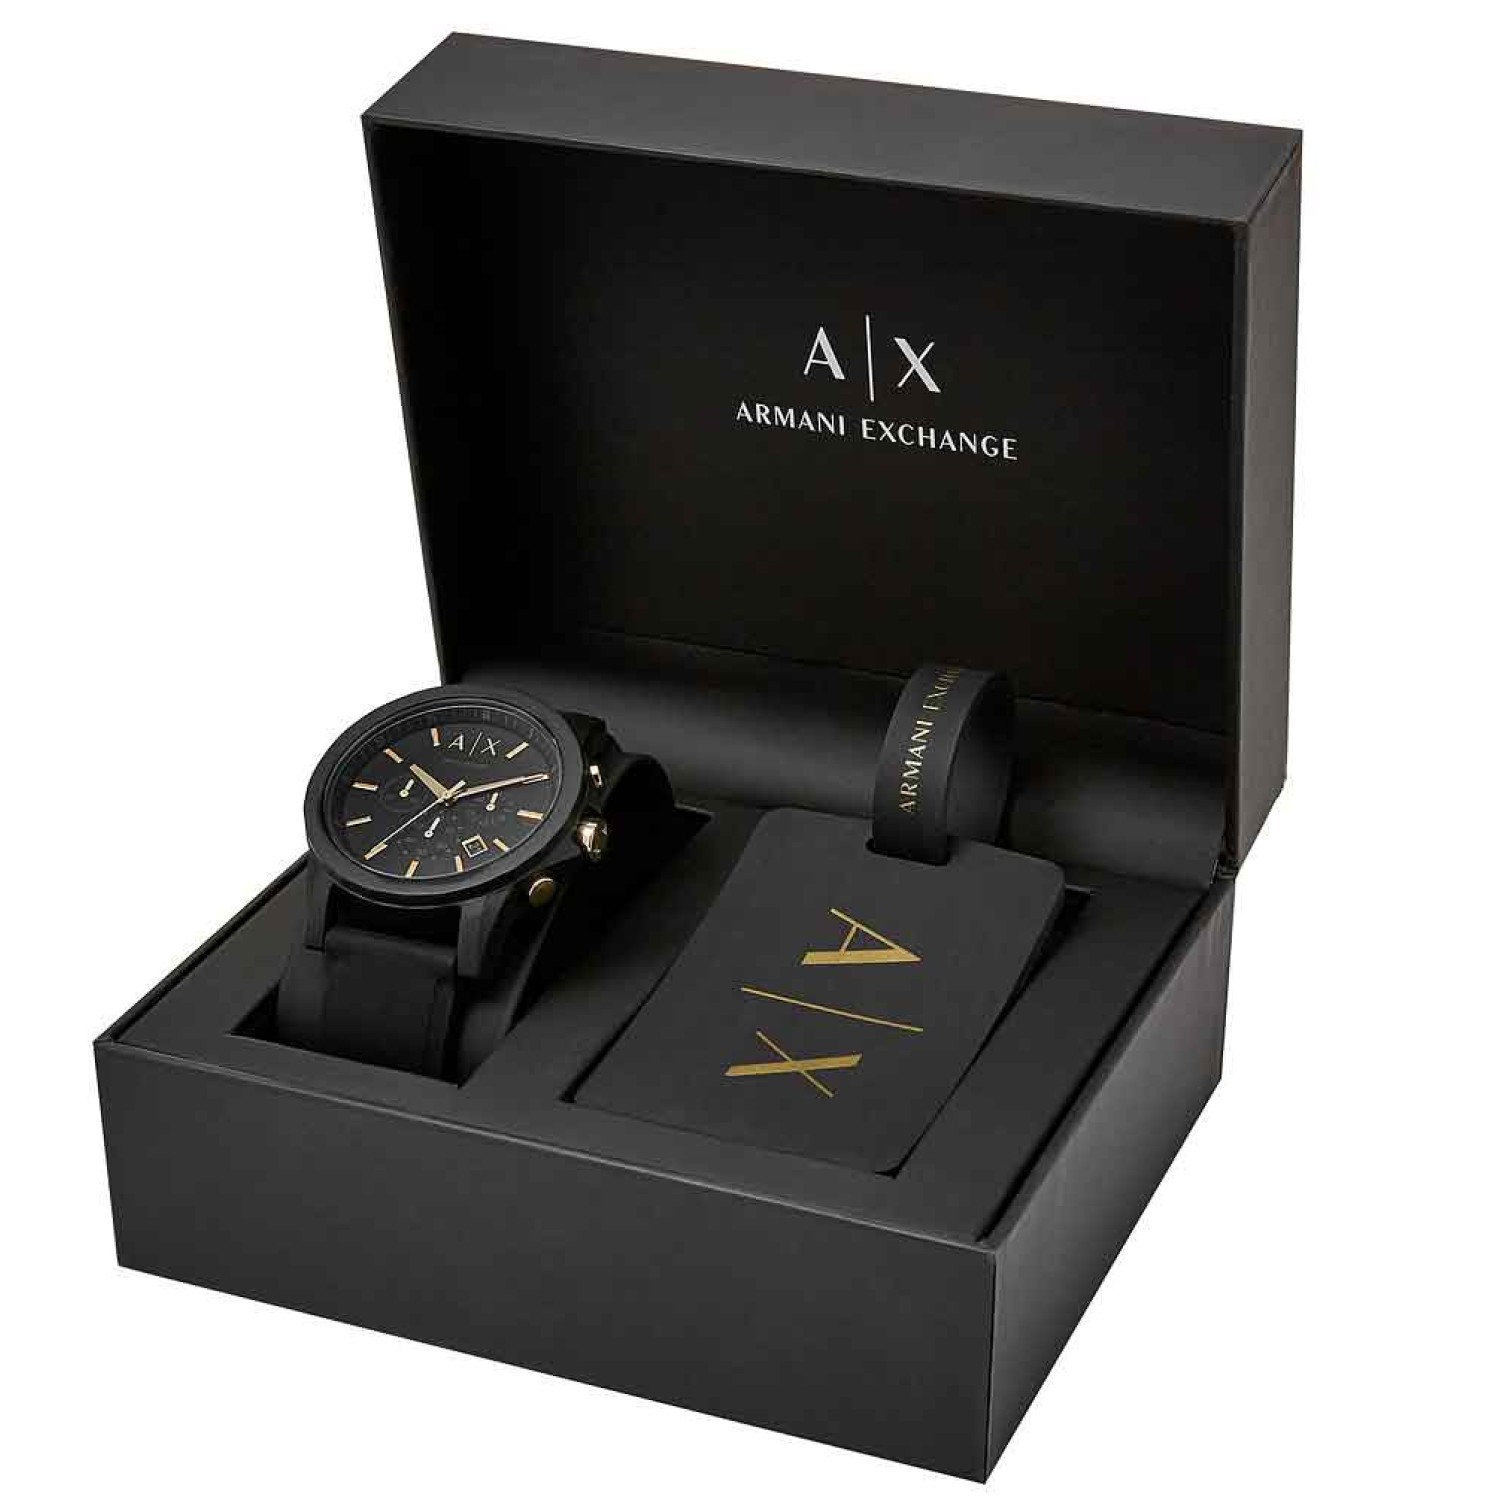 AX7105 A|X  Armani Exchange Luggage Tag Gift Set. This mens gift set from Armani Exchange features a watch with a matte black chronograph dial, gold-tone stick indexes, black IP case and finished with a black silicone strap. The gift set is completed by a